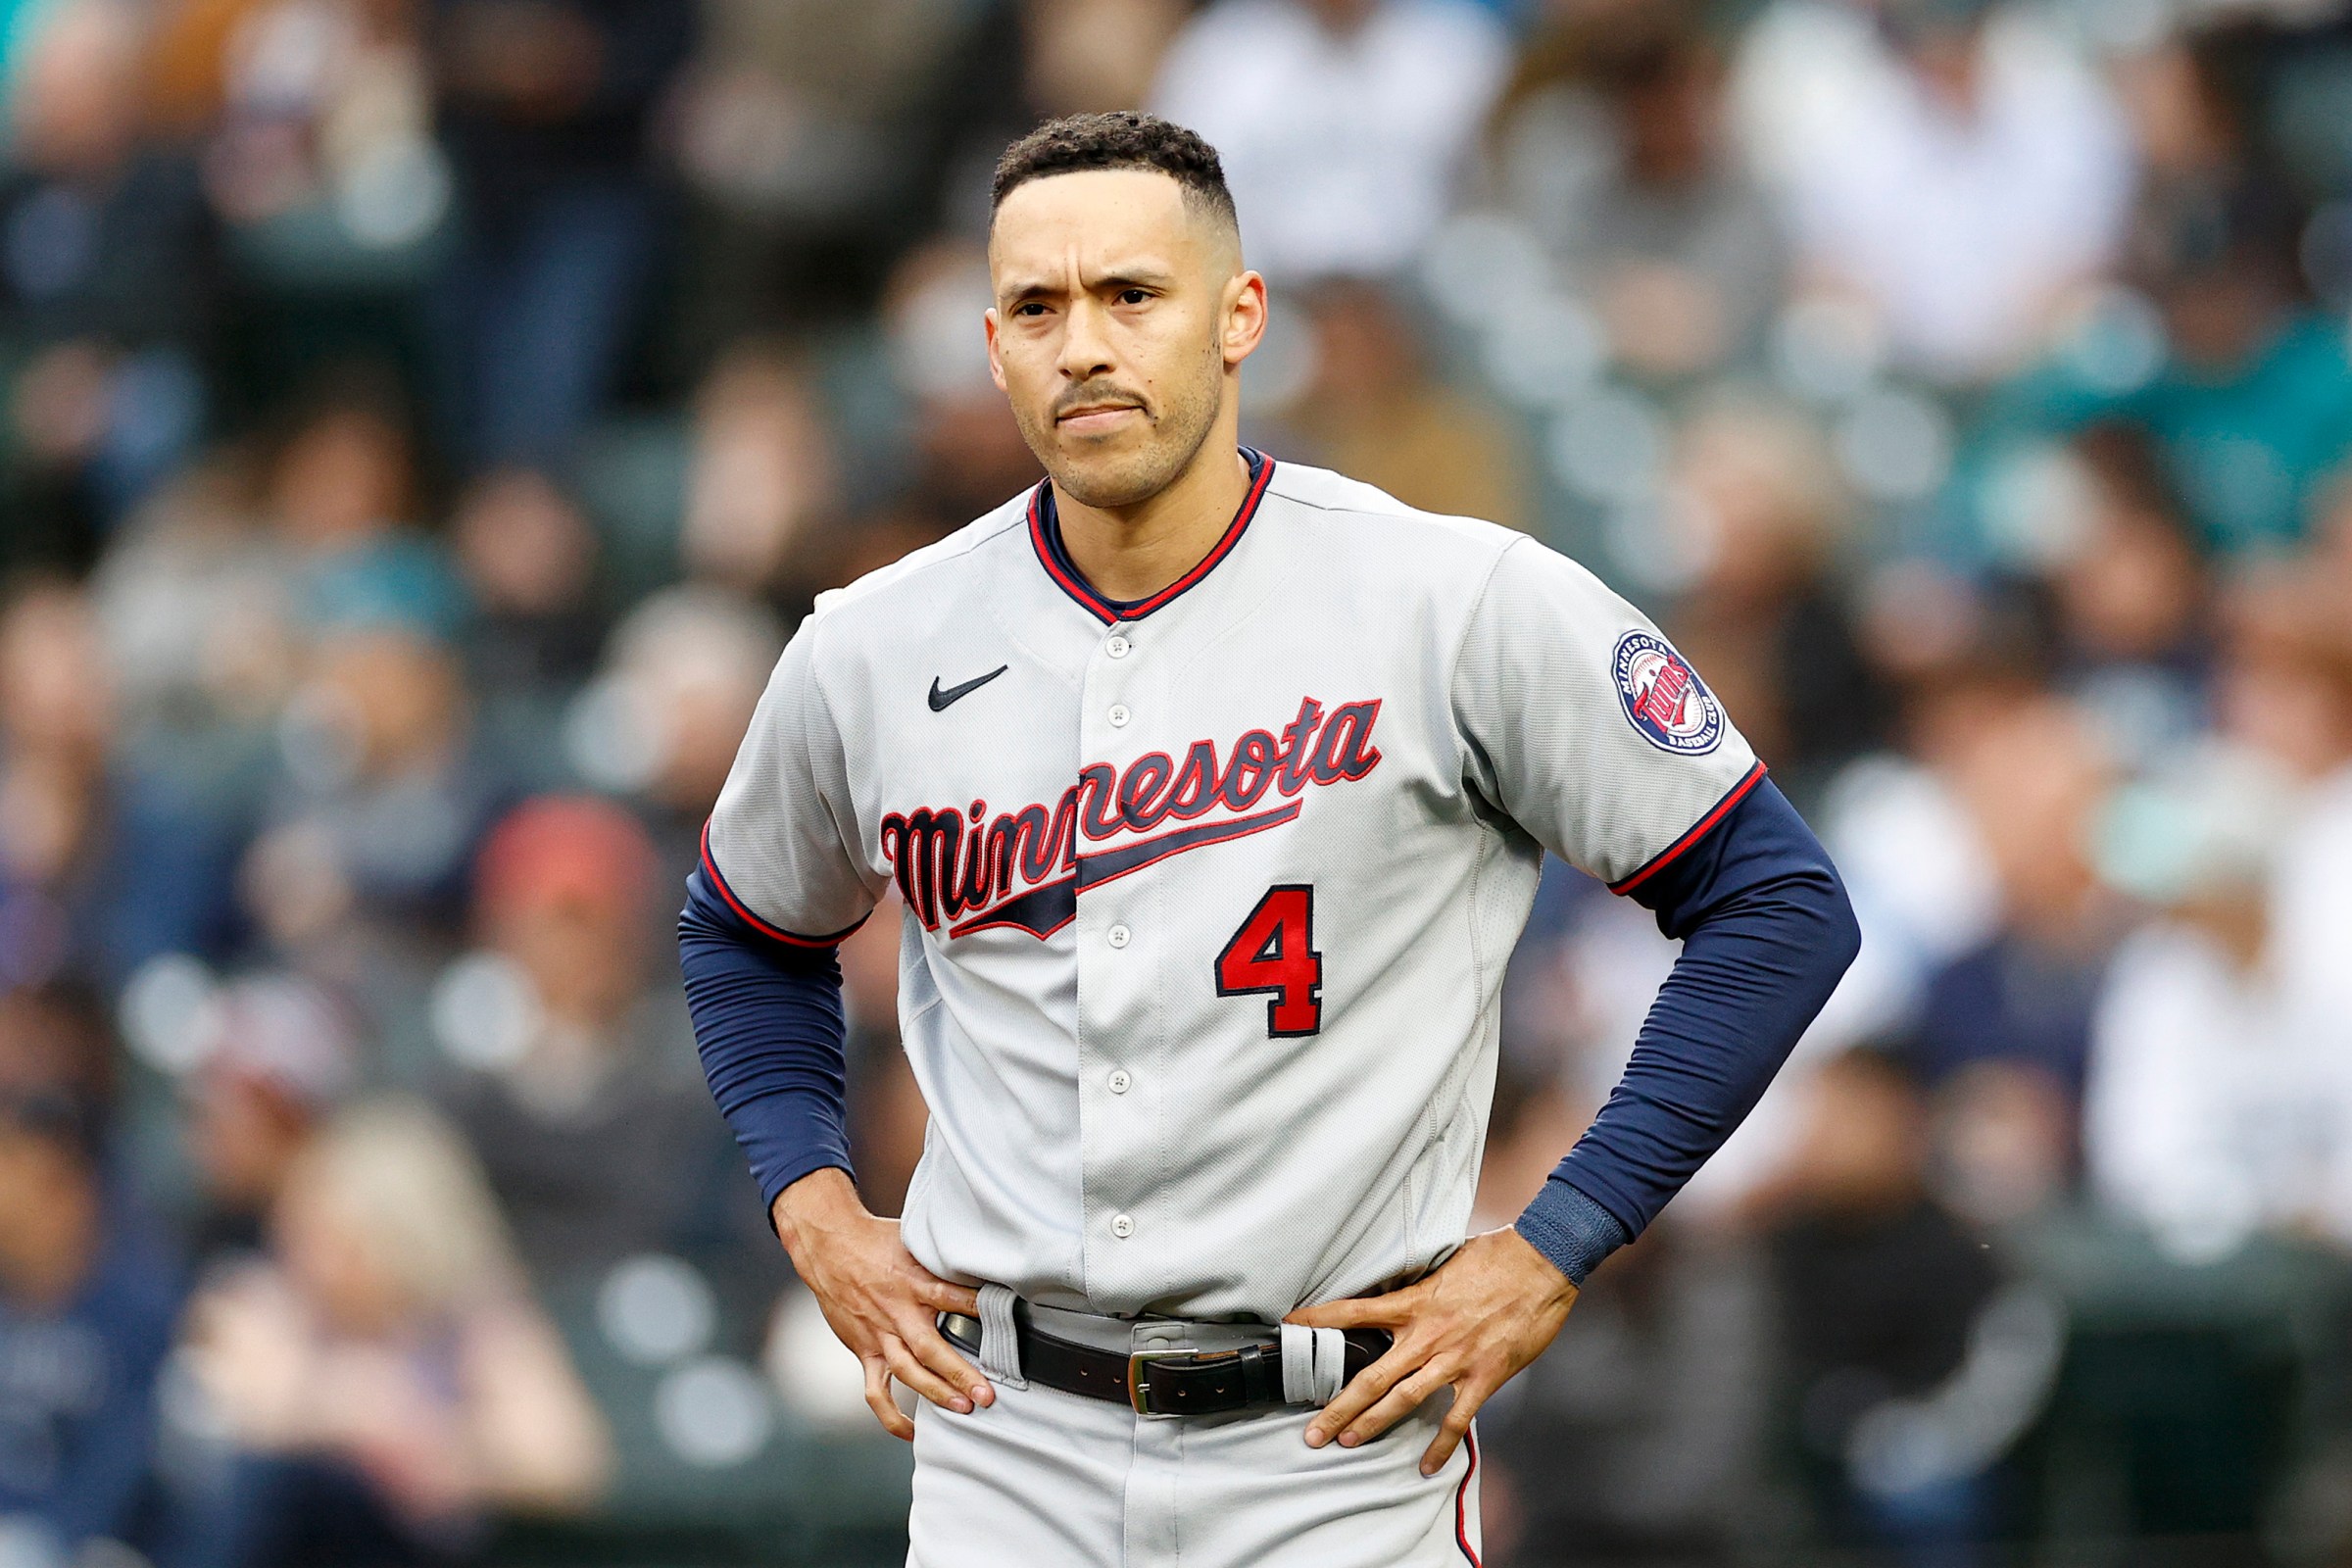 SEATTLE, WASHINGTON - JUNE 14: Carlos Correa #4 of the Minnesota Twins looks on during the game against the Seattle Mariners at T-Mobile Park on June 14, 2022 in Seattle, Washington.